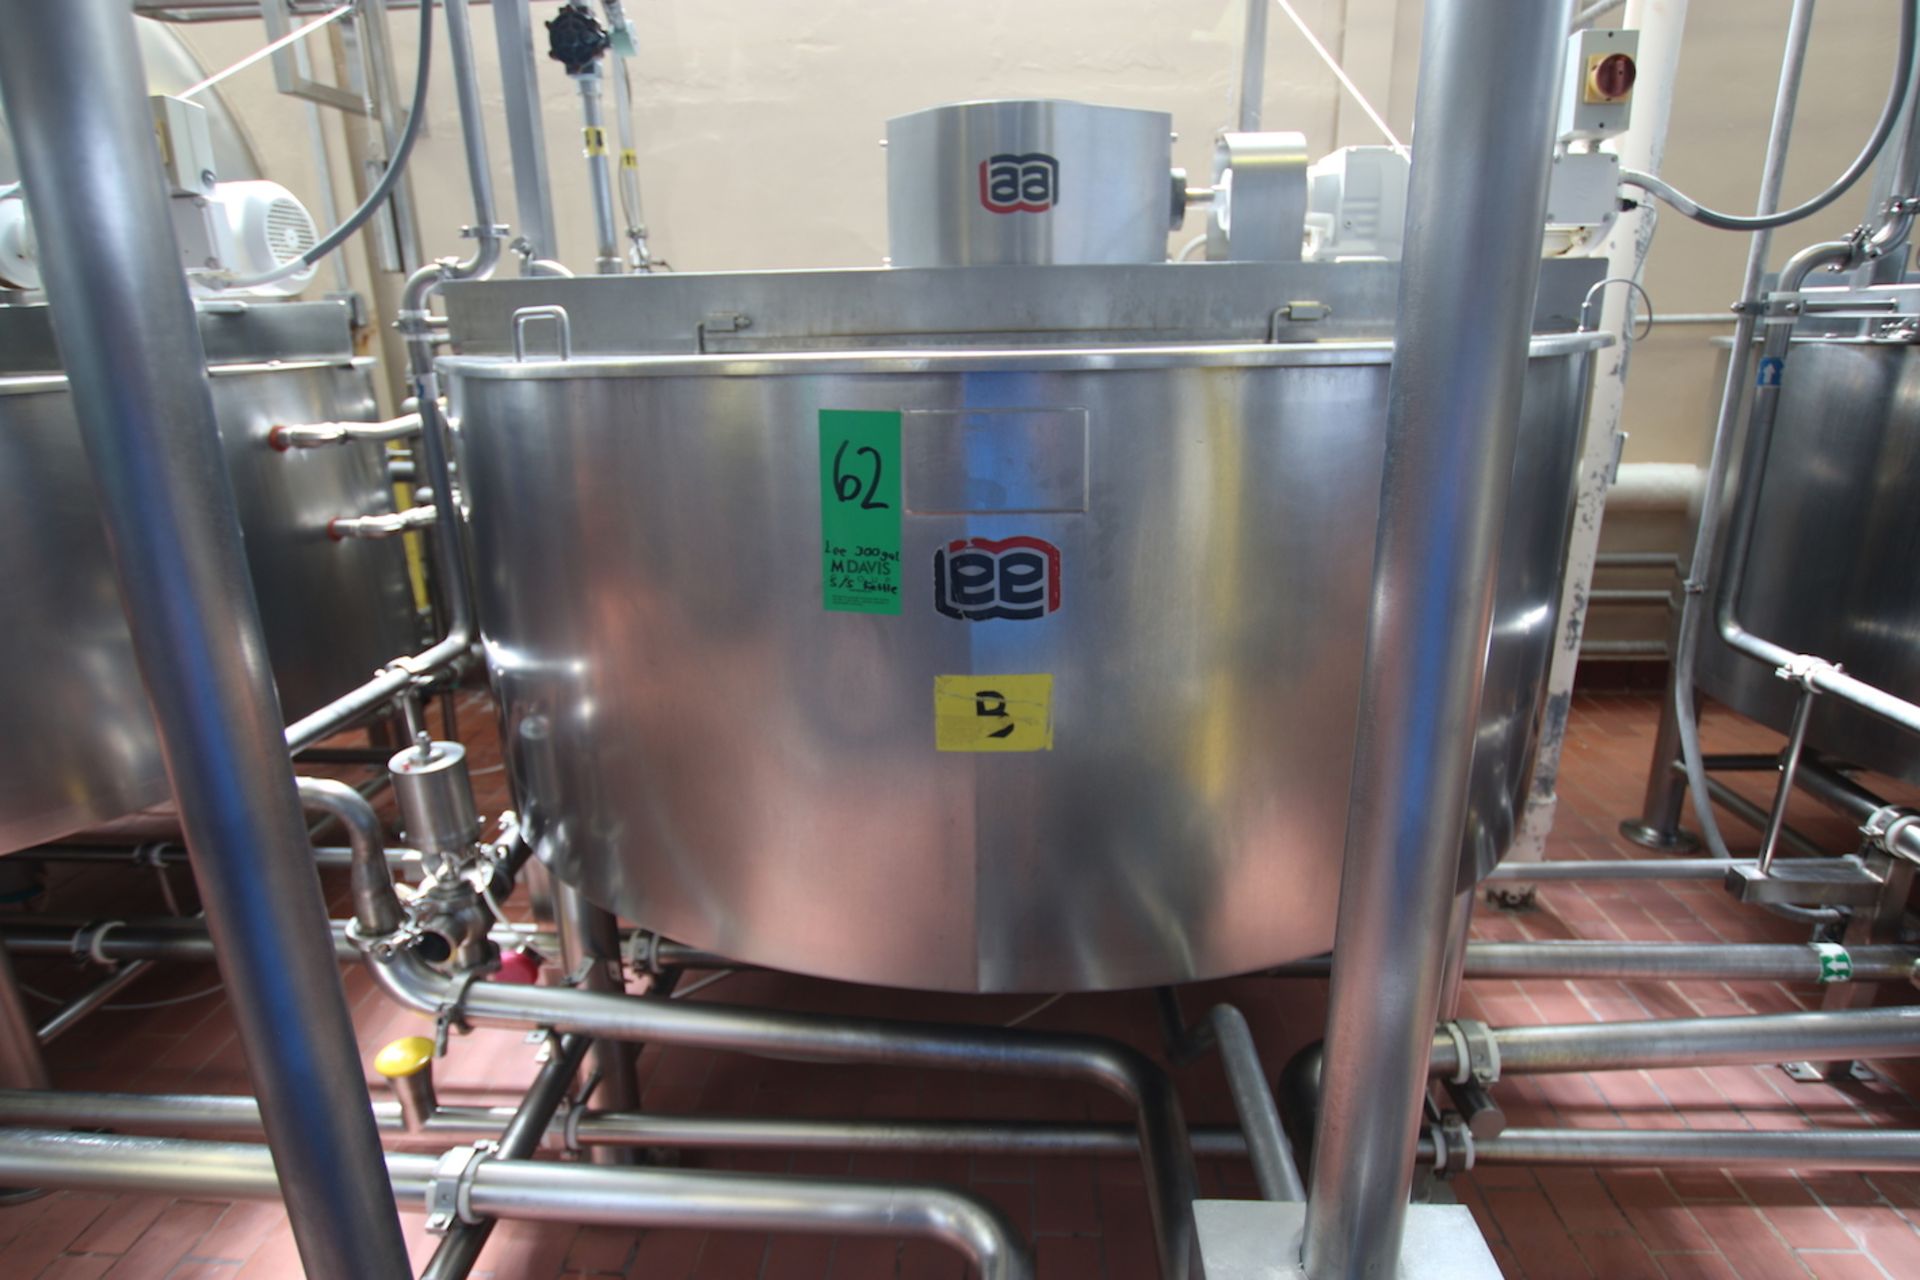 Lee 250 Gal. Cone Bottom S/S Kettle / Processor, M/N 250U9MS, S/N 19108-1-3, Equipped with Sweep/